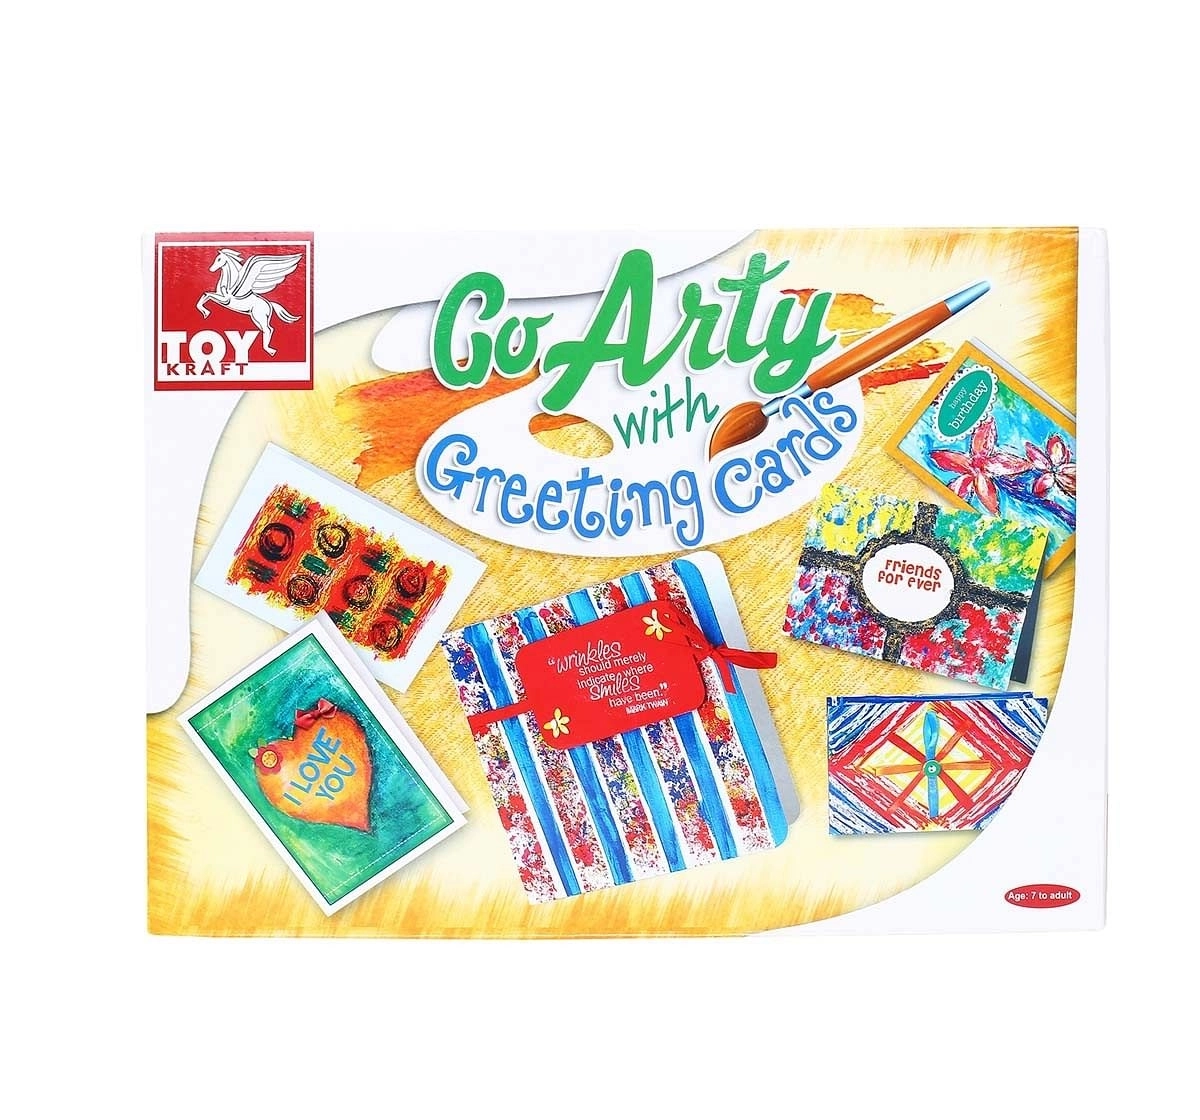 Toy Kraft Go Arty with Greeting Cards DIY Art & Craft Kits for Kids age 7Y+ 